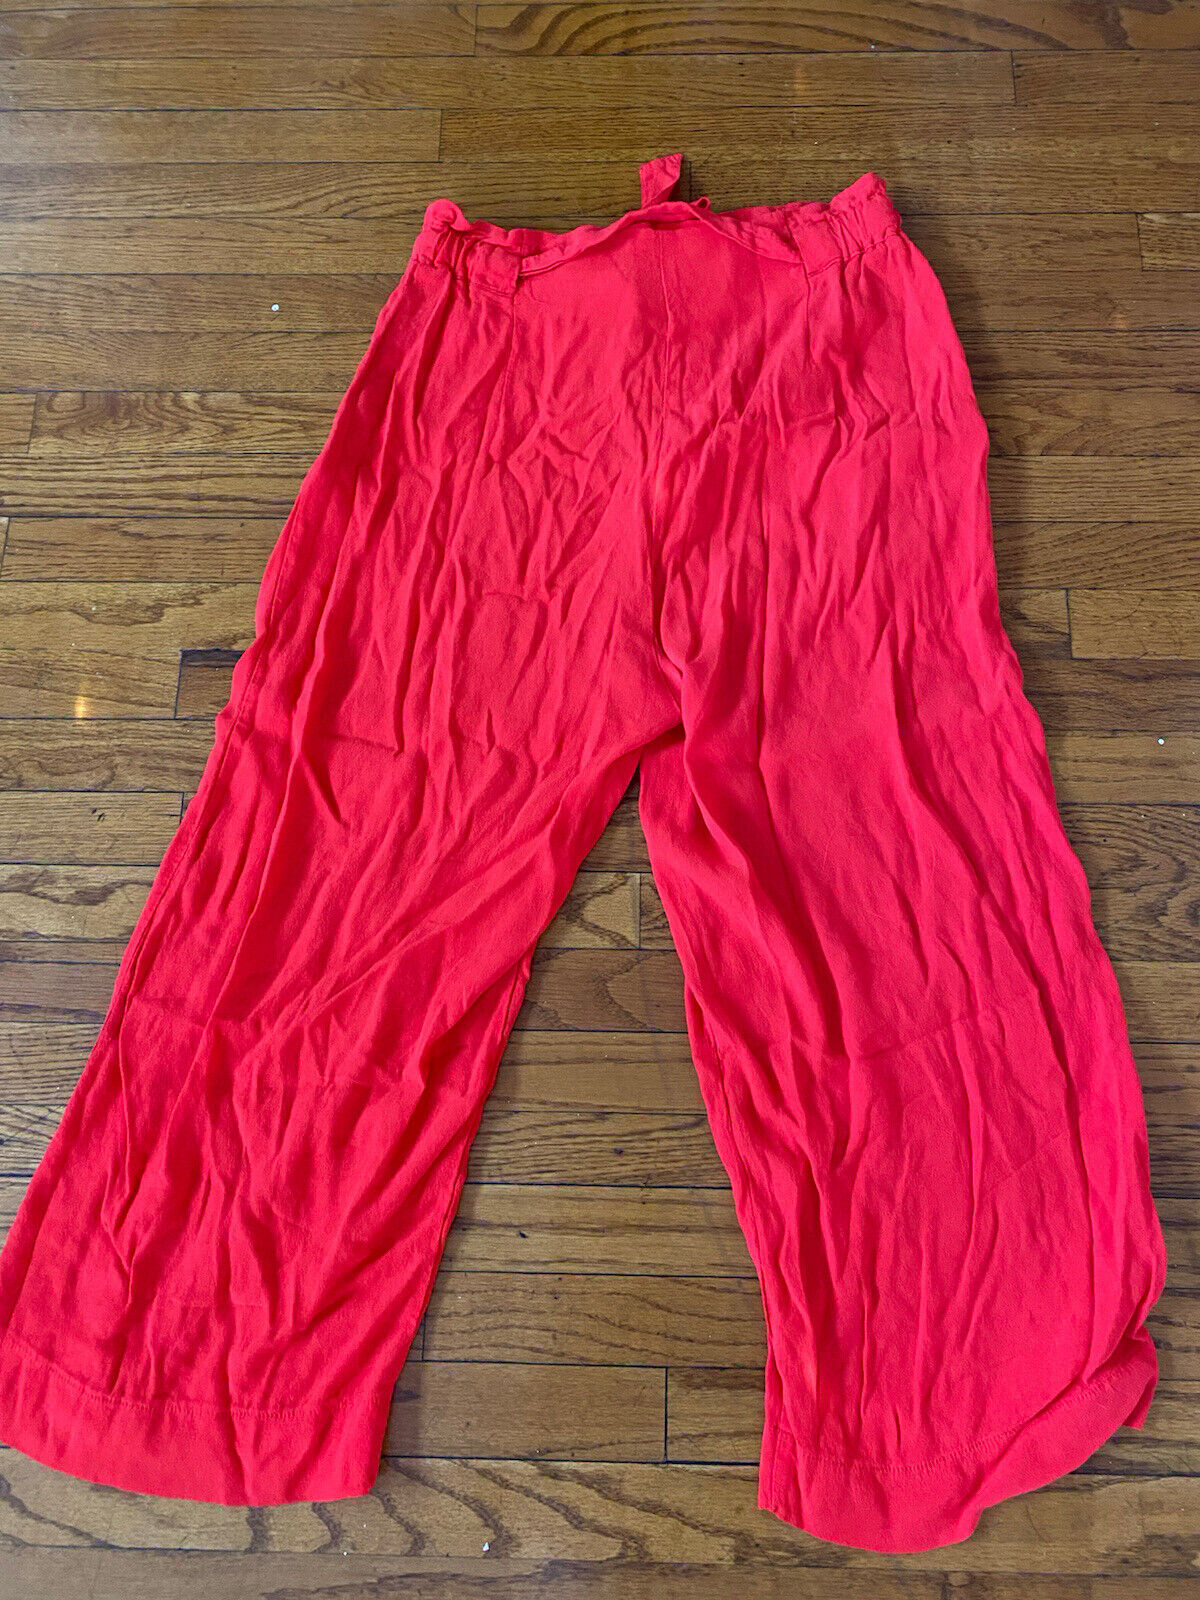 Red Trouser Pants - Unbranded - Women’s Large # 2119